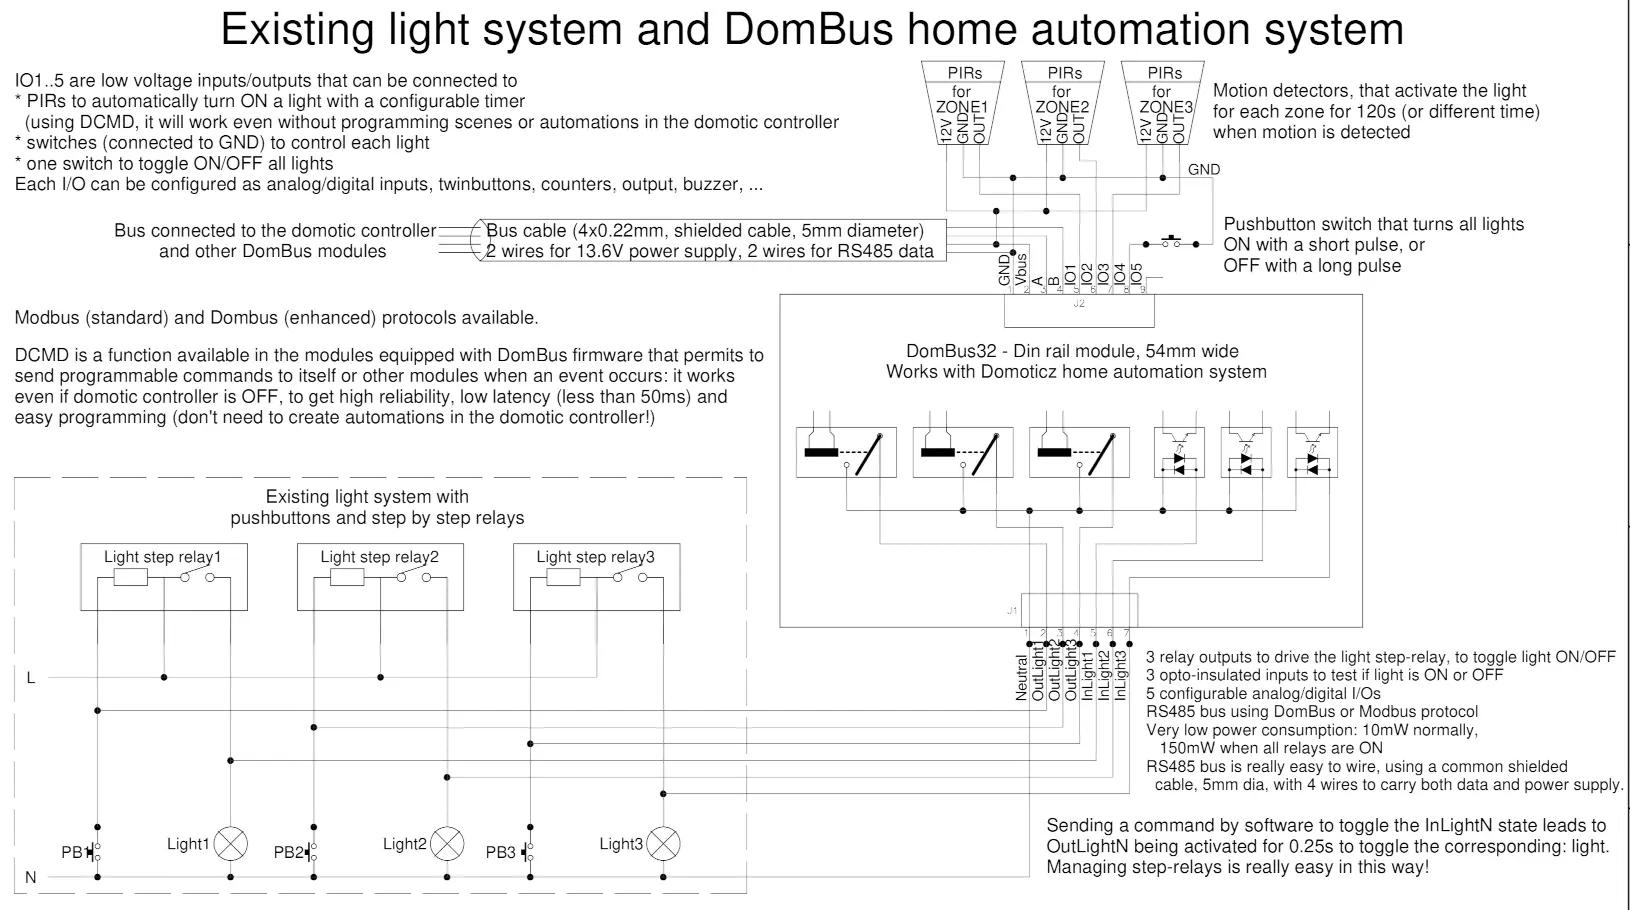 Using DomBus32 module to control a light system using step-by-step relays